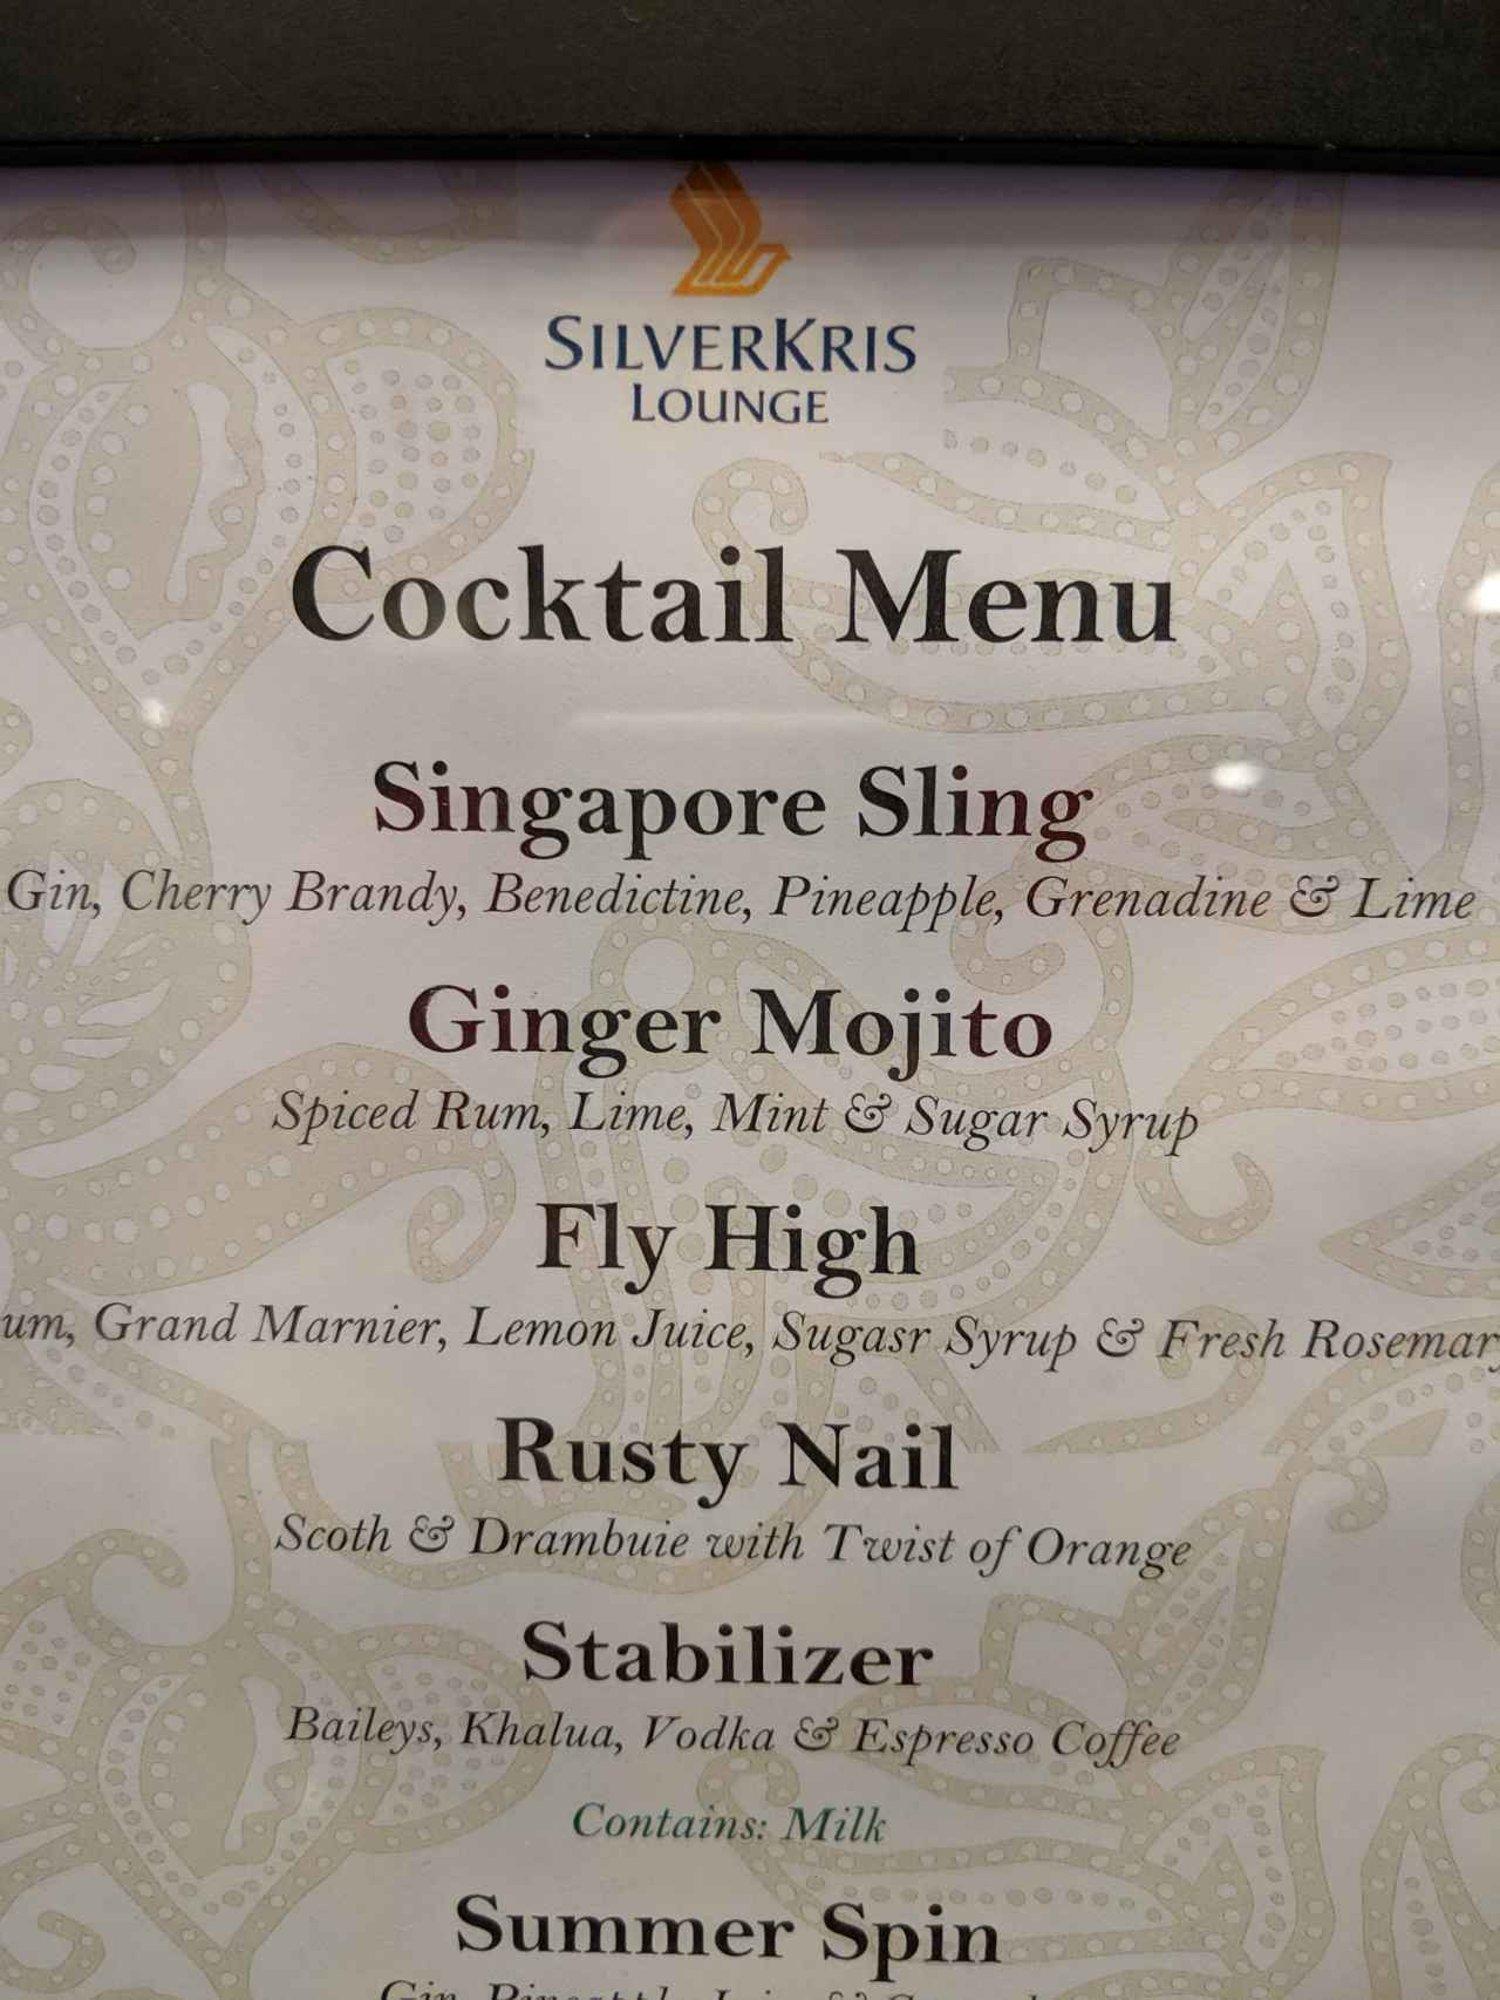 Singapore Airlines SilverKris Lounge image 21 of 36